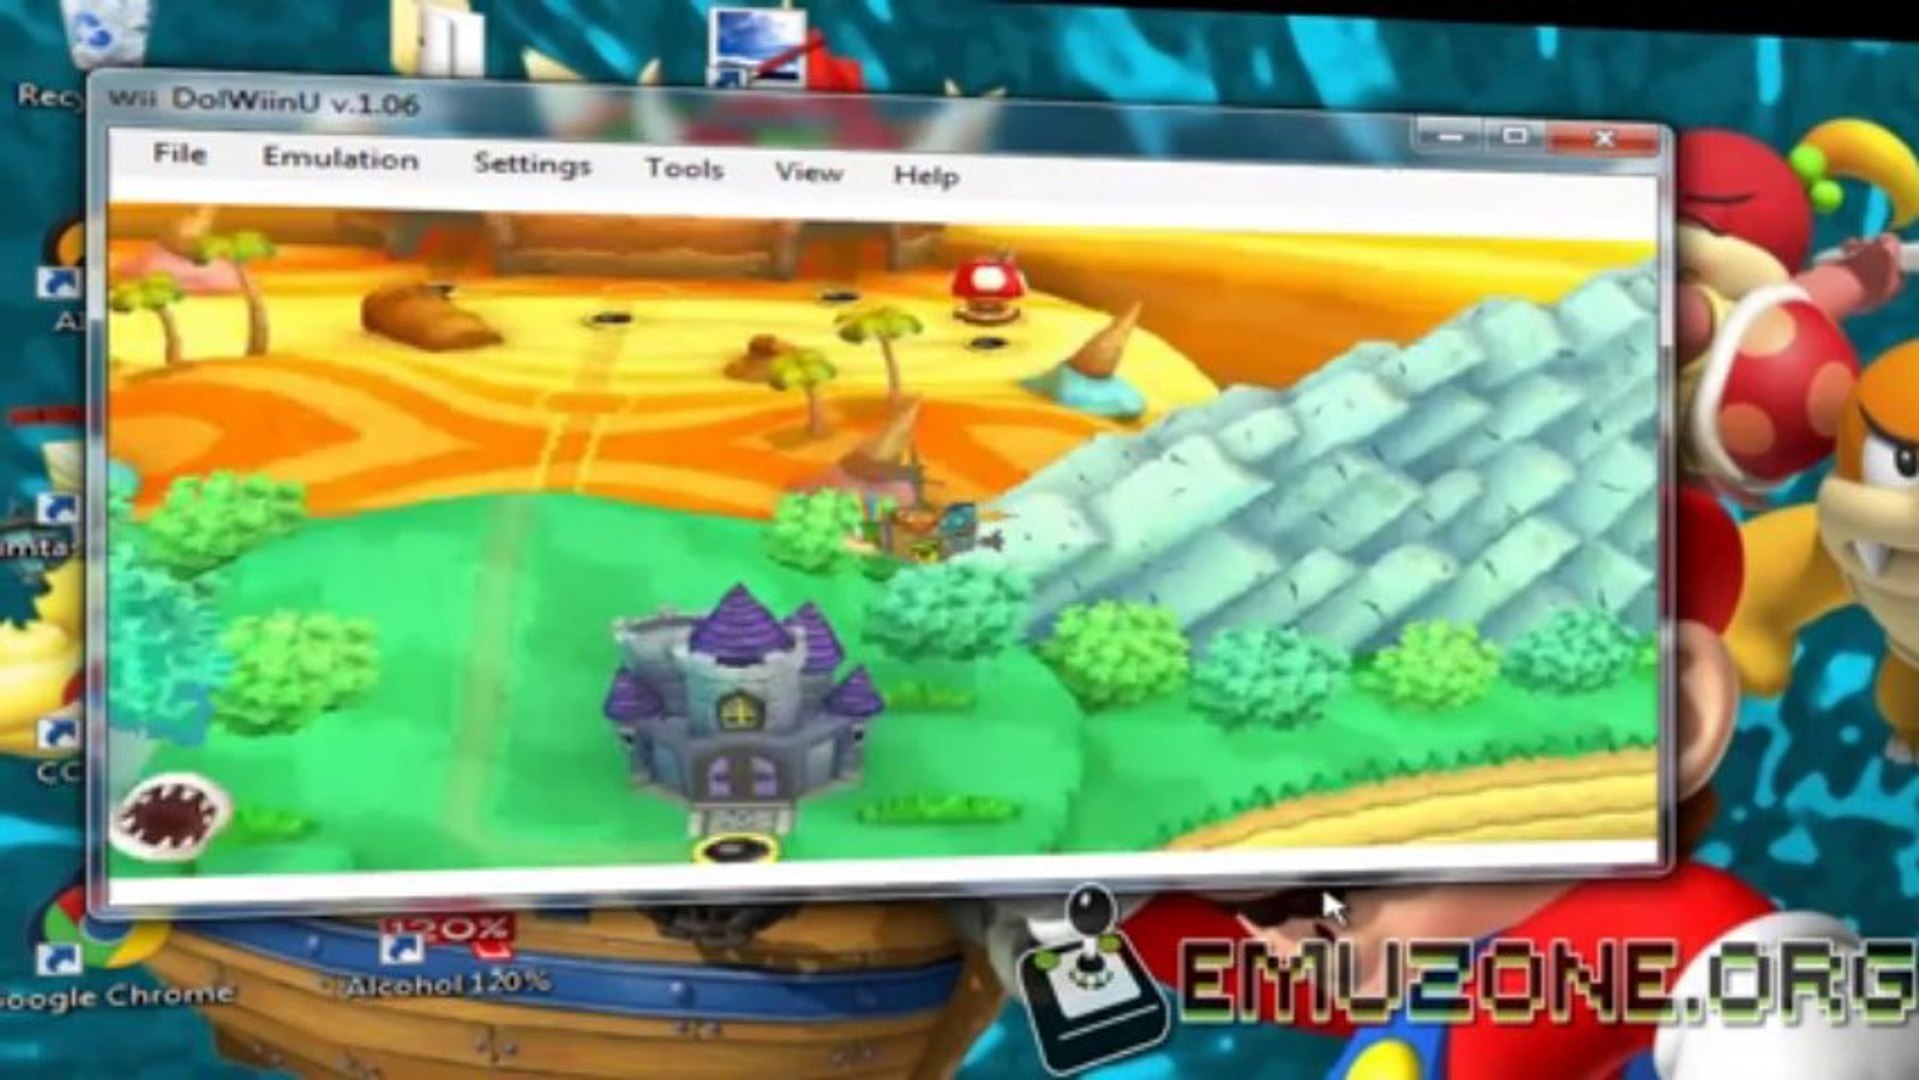 Wii U Emulator For PC [Windows 7/8/Linux/Mac OS X] Download from  Emuzone.org - video Dailymotion